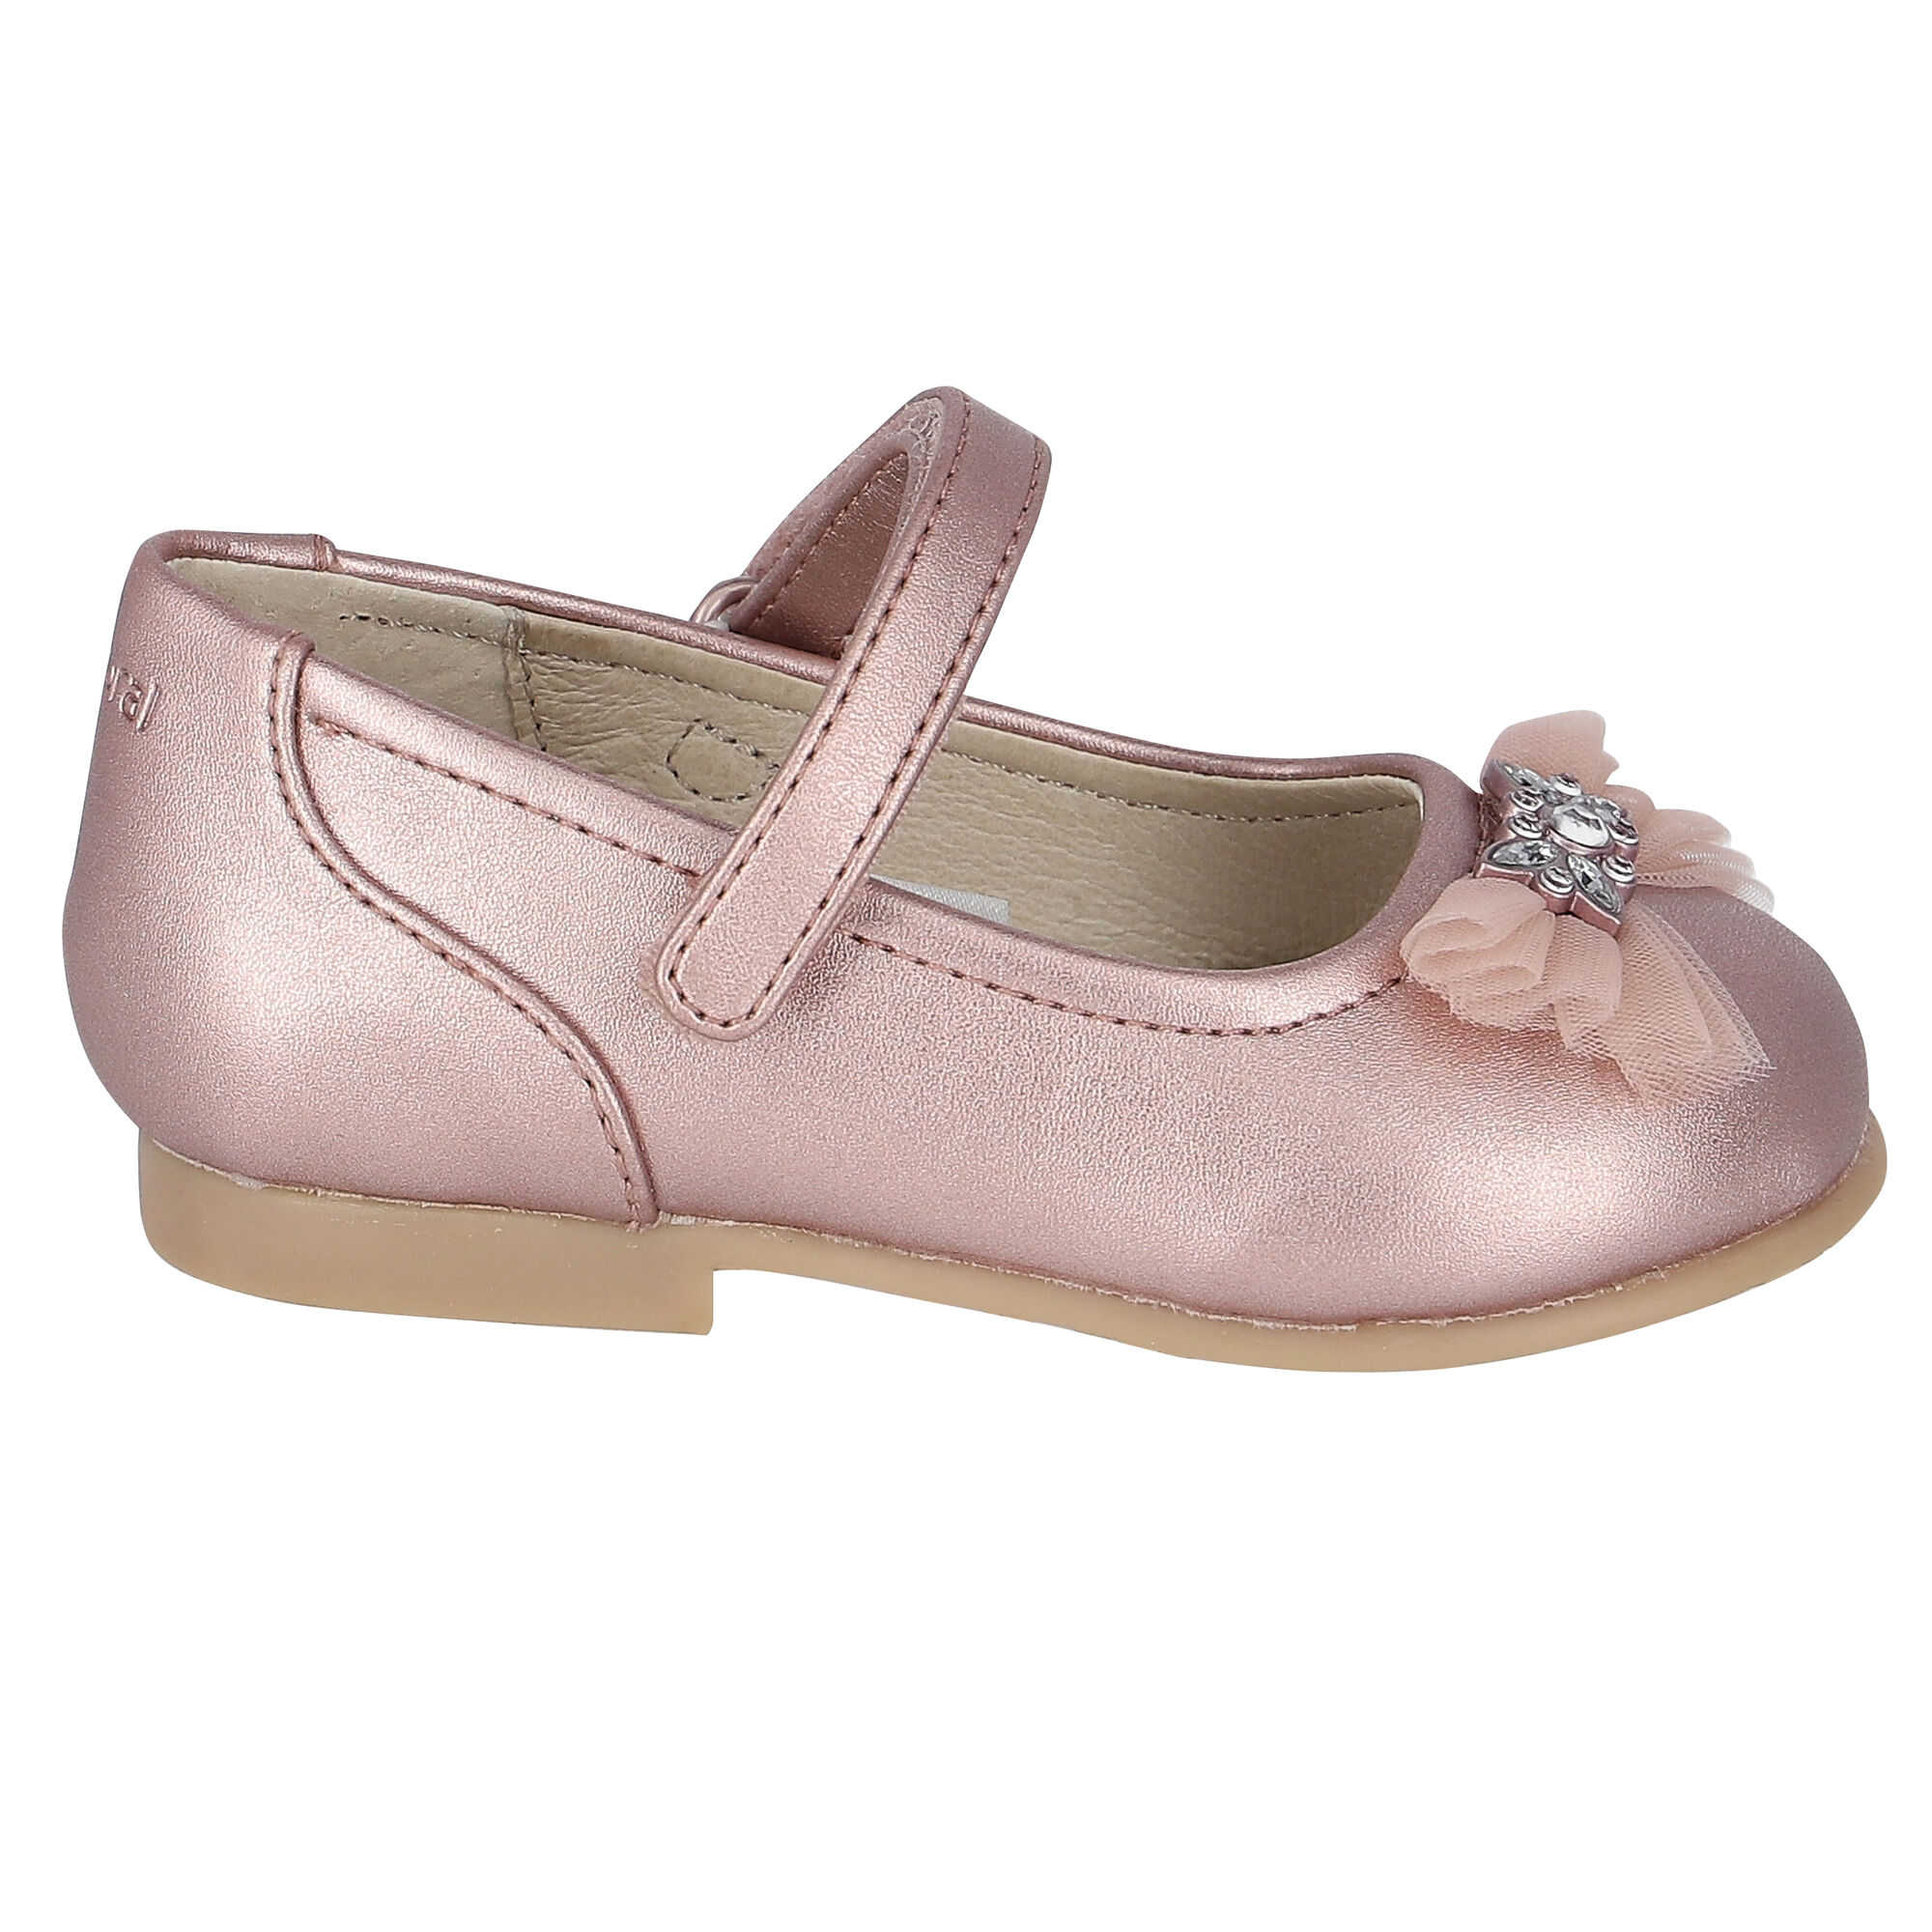 Girls Ballerina First Pram Shoes Occasion Party Leather Insole Size UK 1-4 